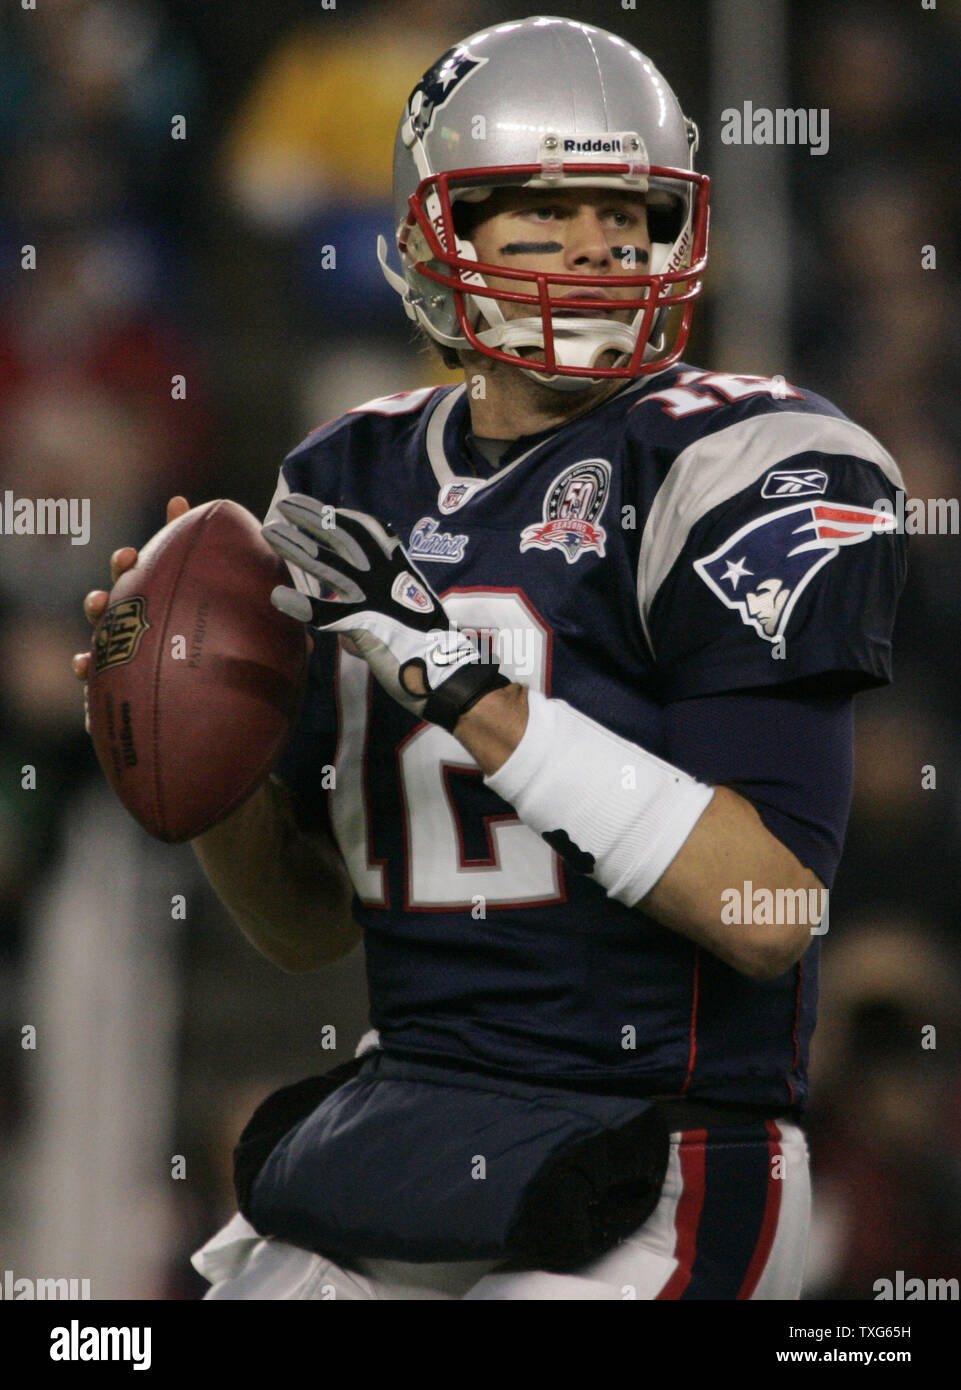 New England Patriots quarterback Tom Brady (12) drops back for a pass against the New York Jets in the first quarter at Gillette Stadium in Foxboro, Massachusetts on November 22, 2009.    UPI/Matthew Healey Stock Photo